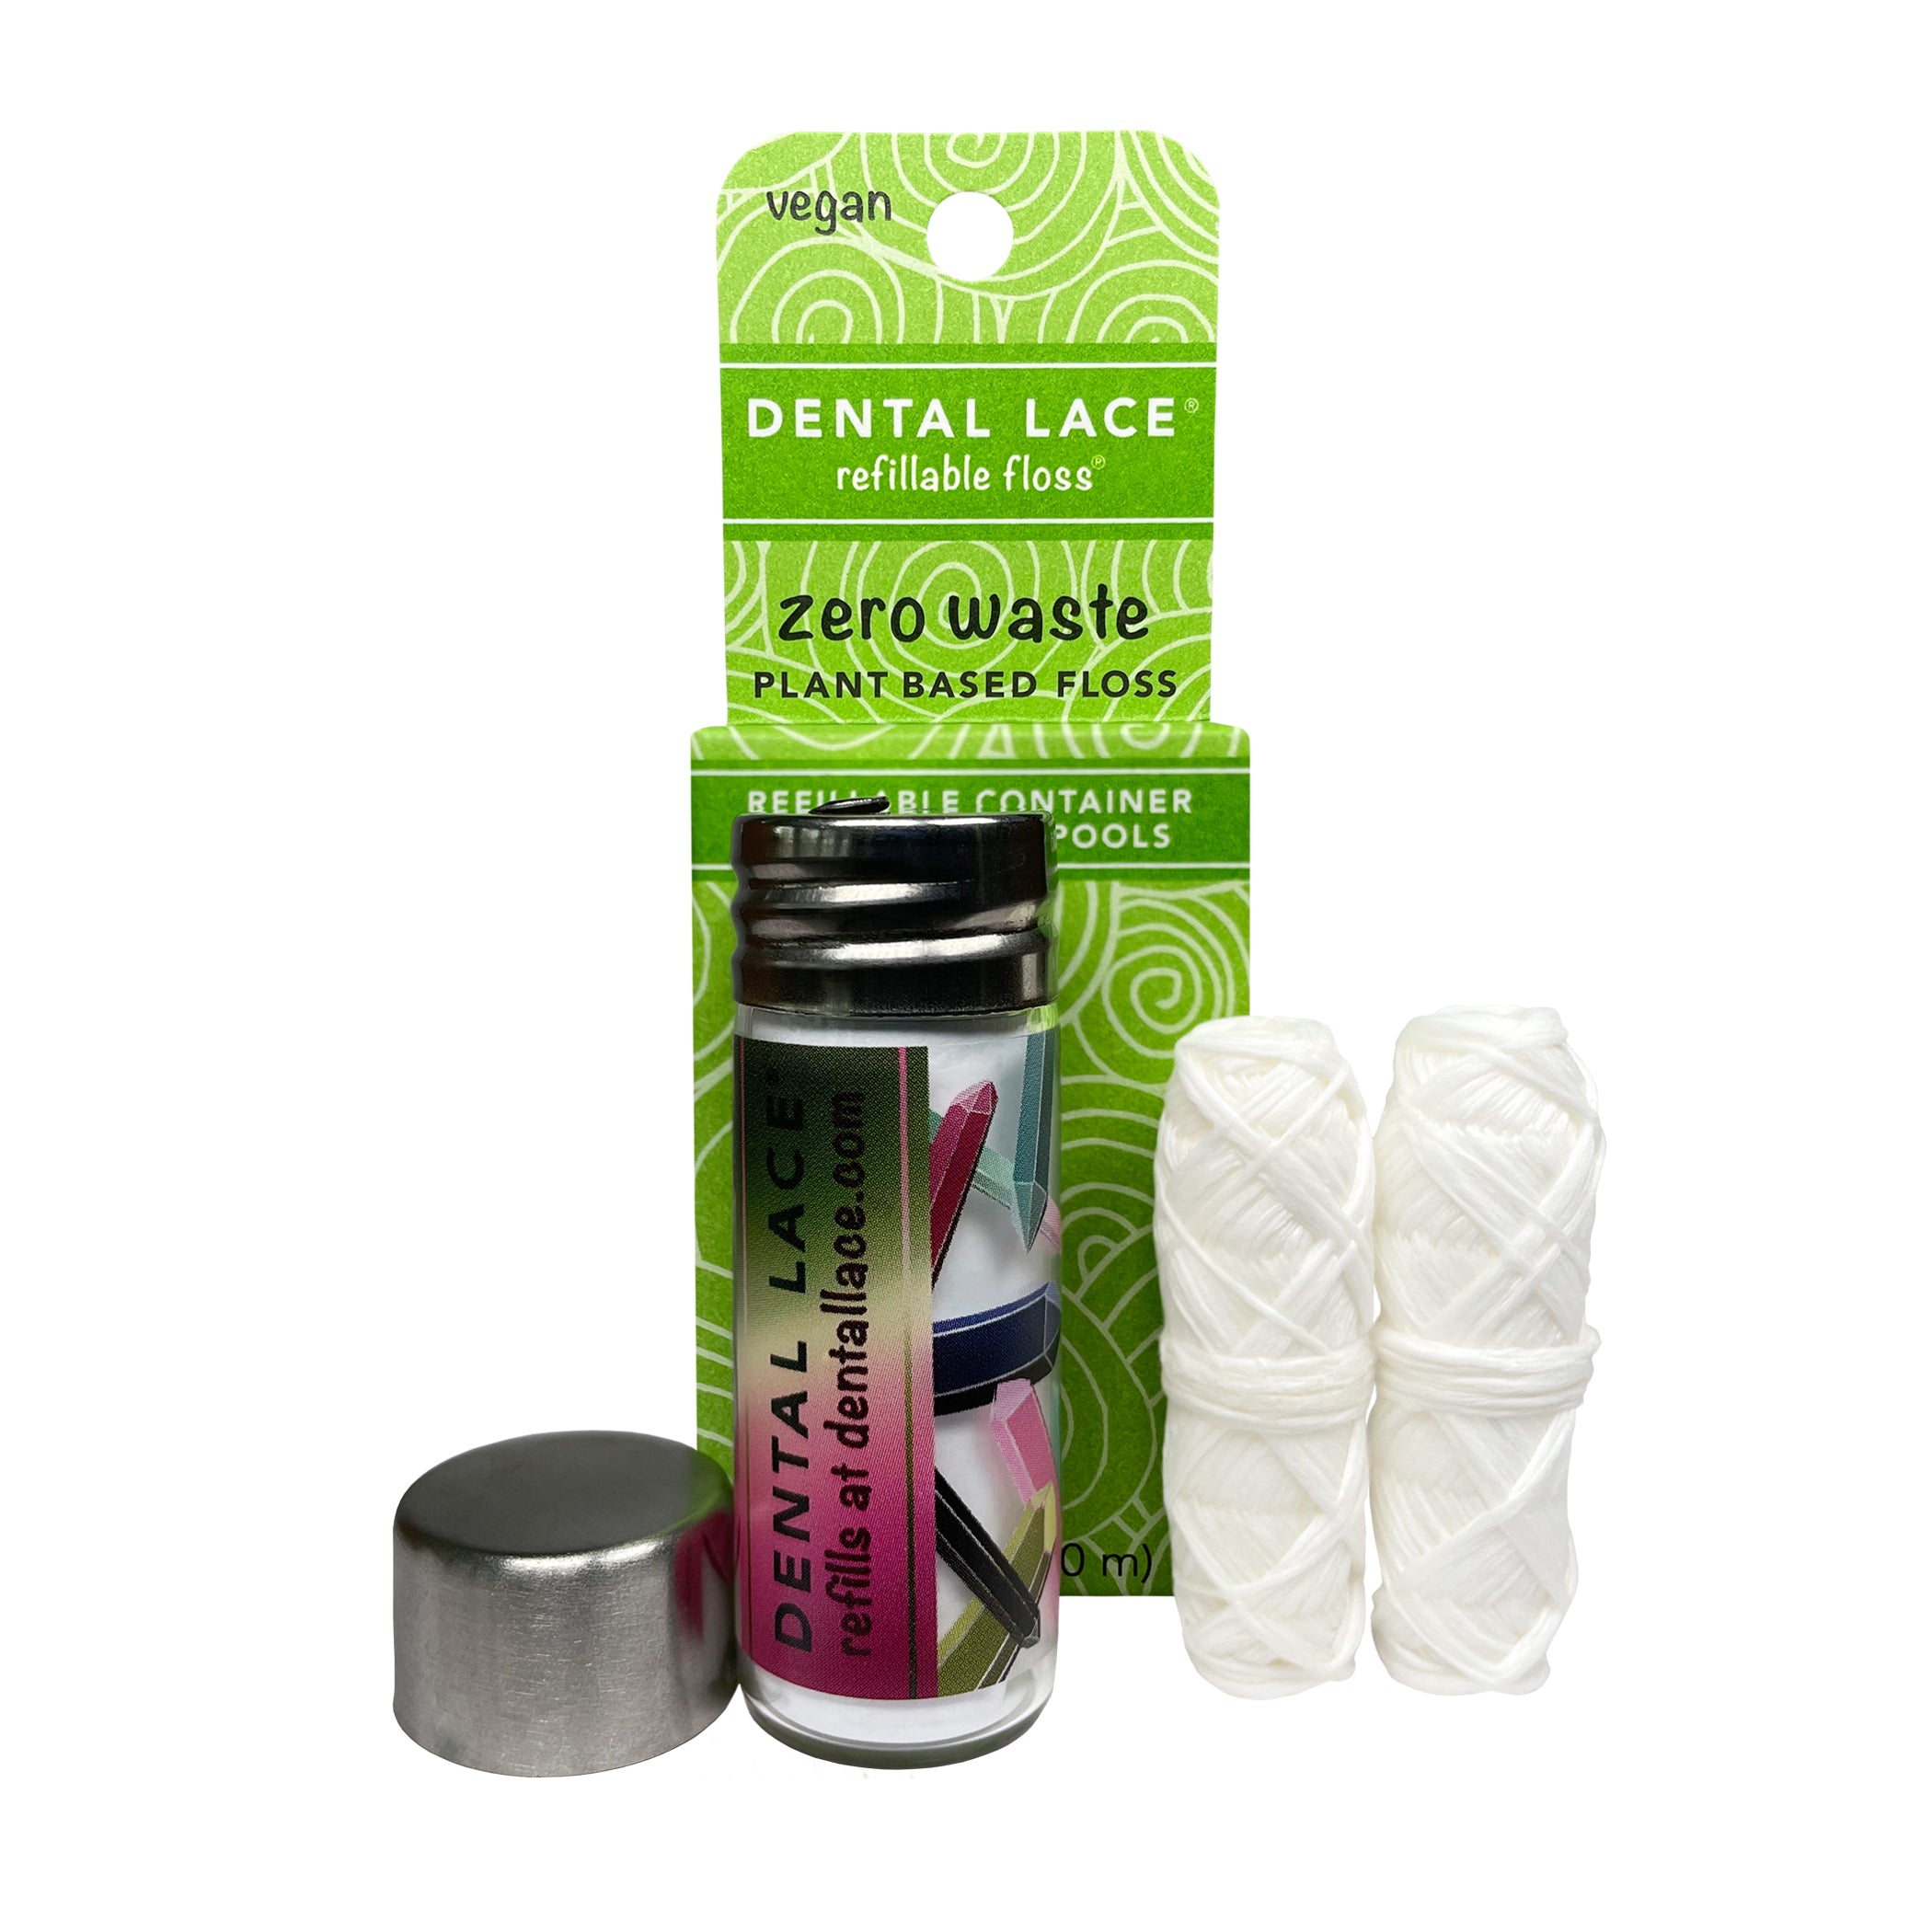 Dental Lace Refillable Zero Waste Plant Based Vegan Floss Container with Refill